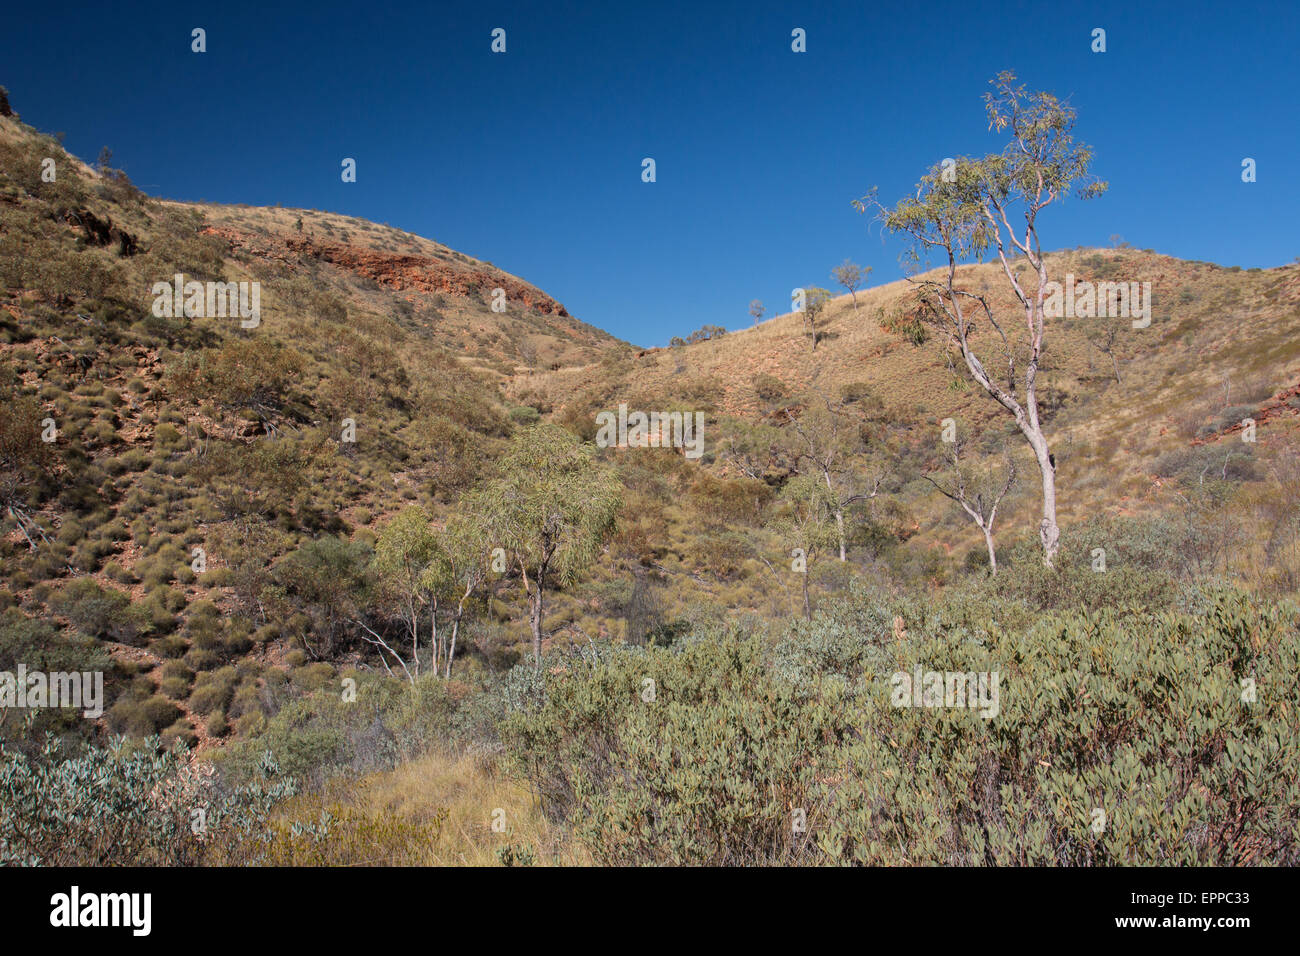 Vegetated valley at Ormiston Gorge in an arid region of West MacDonnell Ranges, Northern Territory, Australia Stock Photo